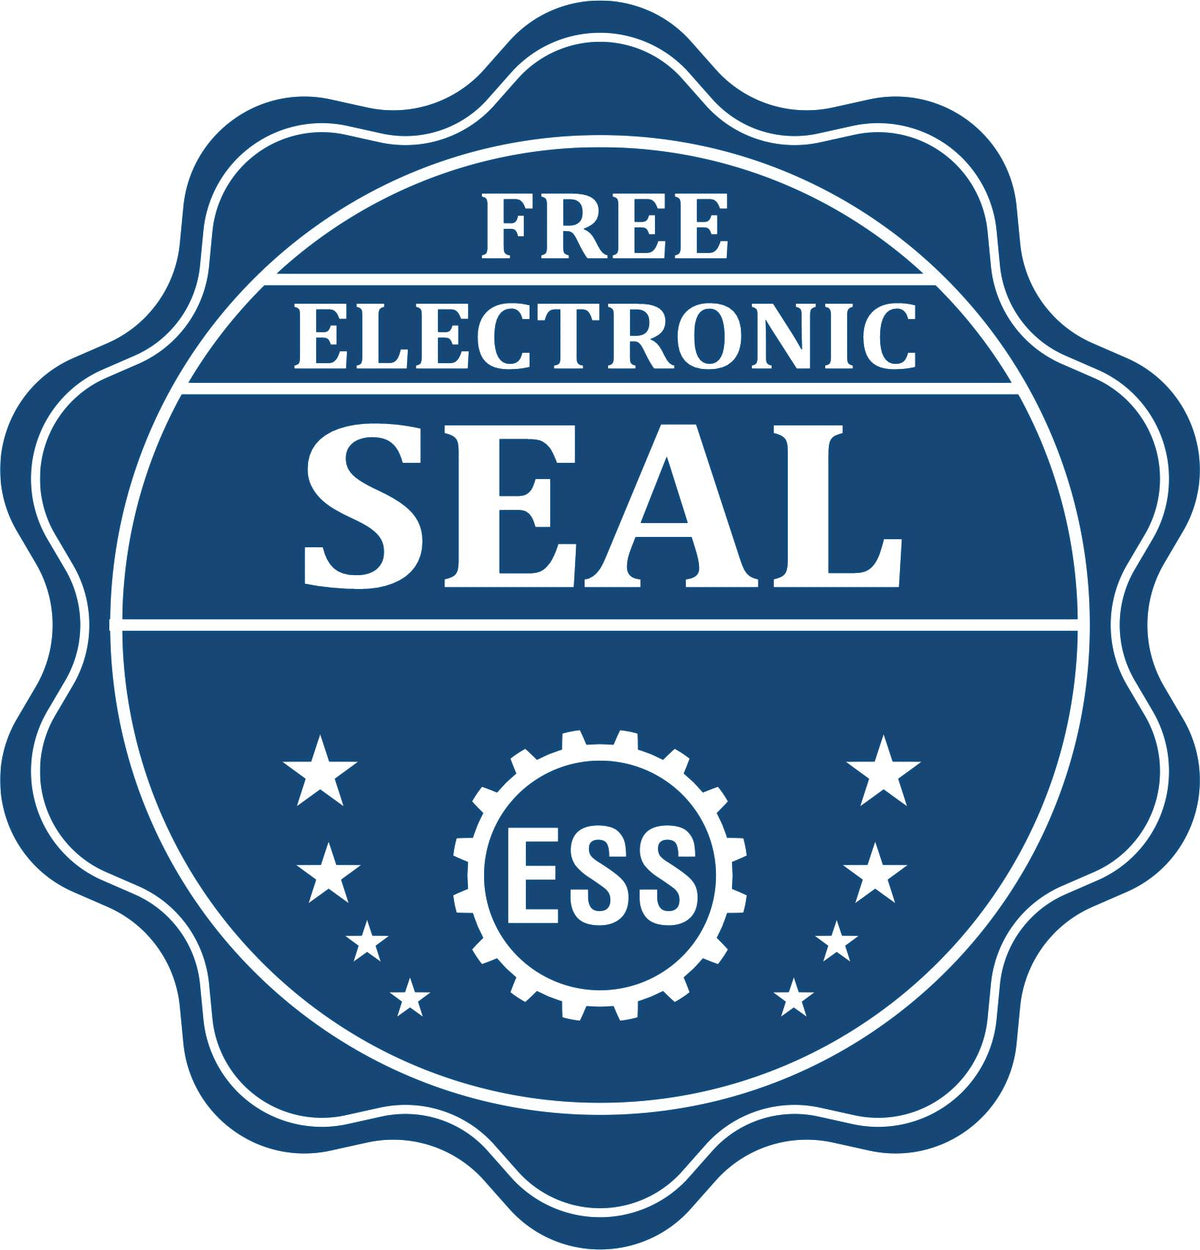 A badge showing a free electronic seal for the Gift Oklahoma Geologist Seal with stars and the ESS gear on the emblem.